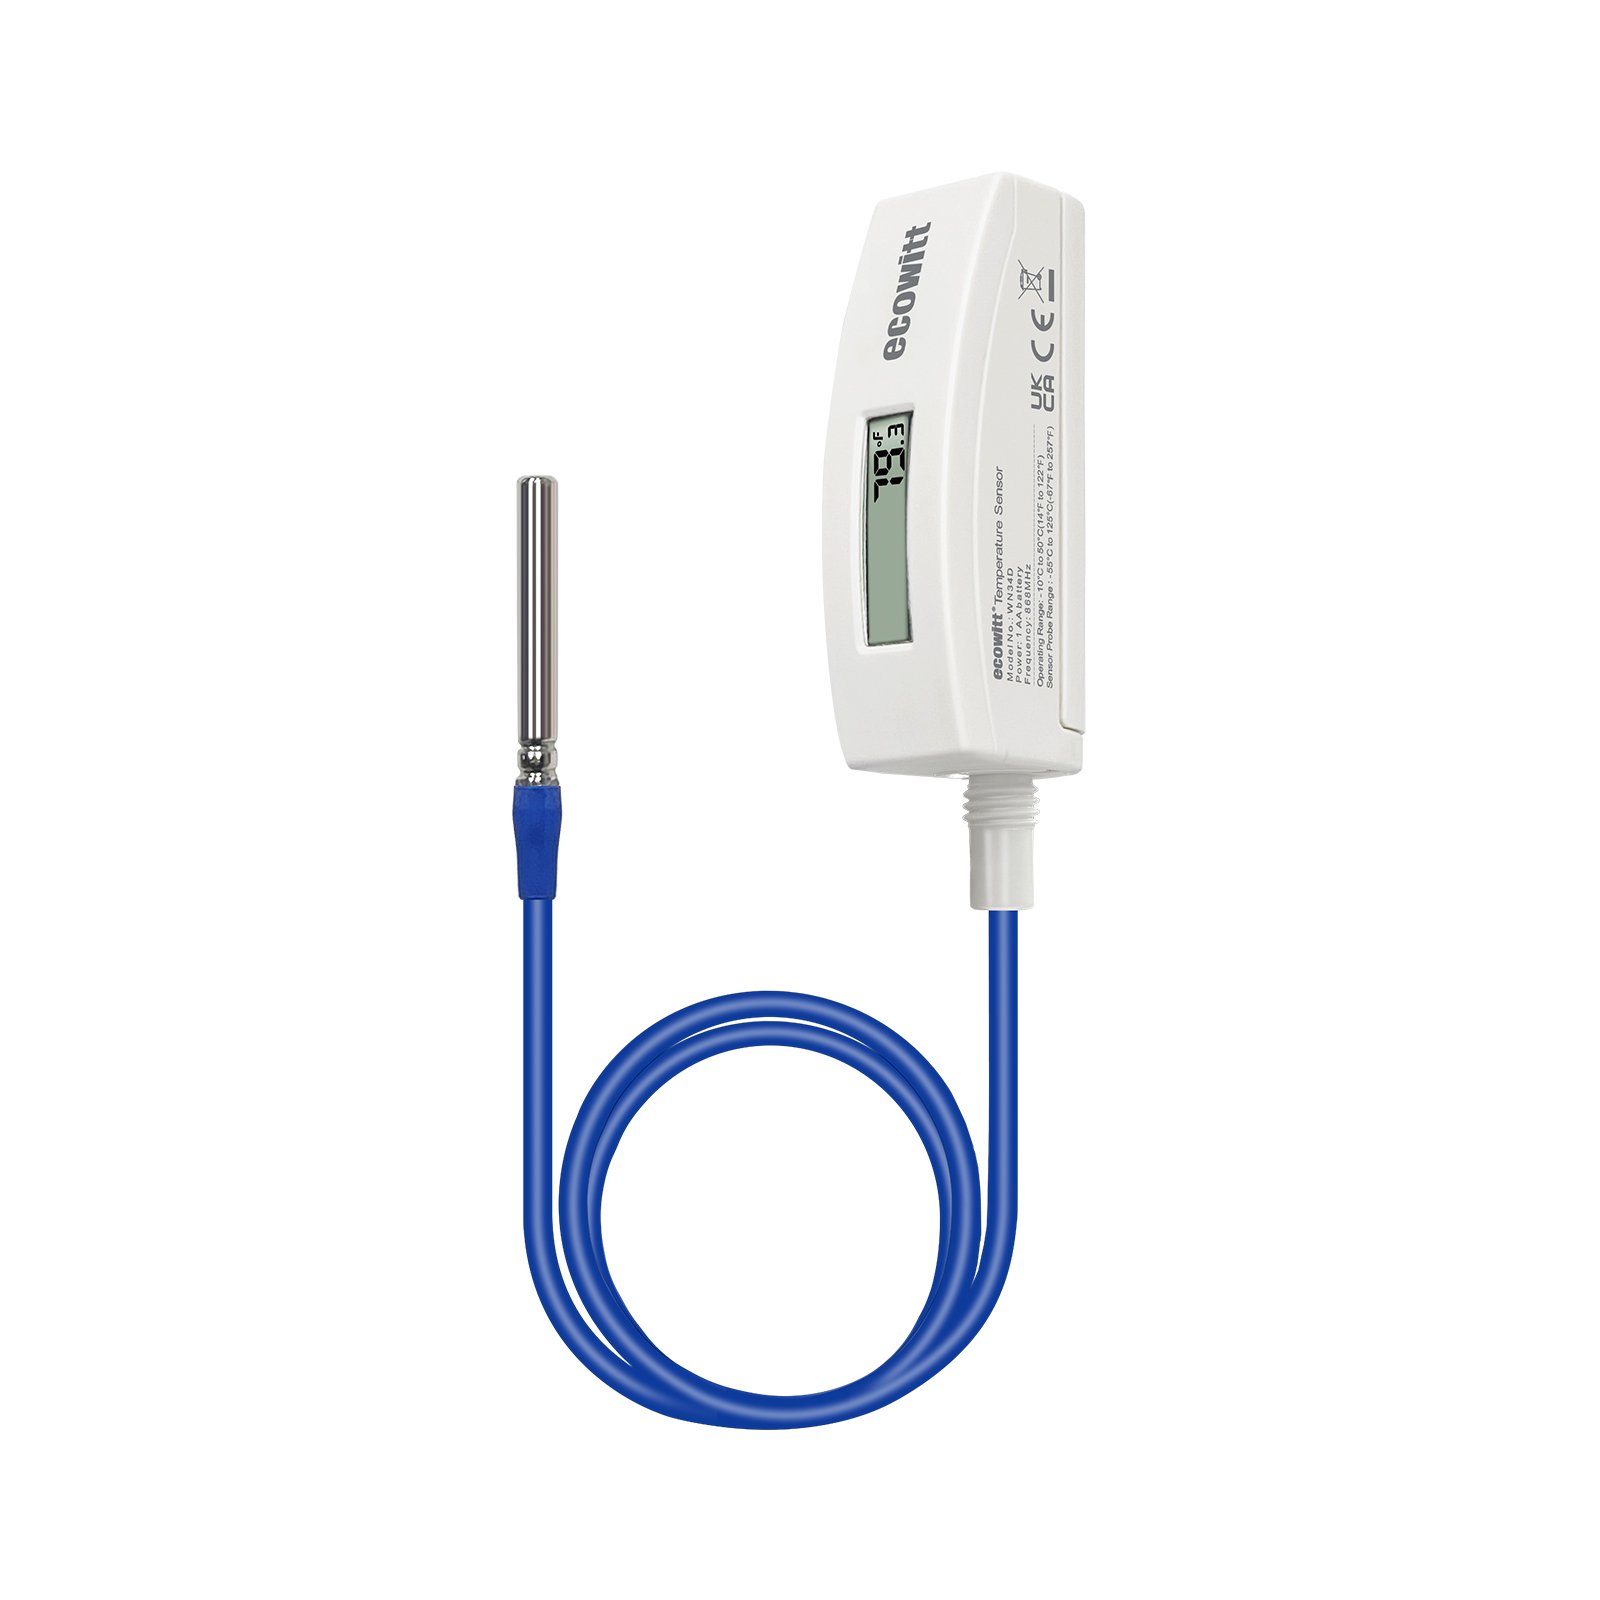 ECOWITT WH31 Wireless Multi-Channel Thermometer with LCD Display Remote App